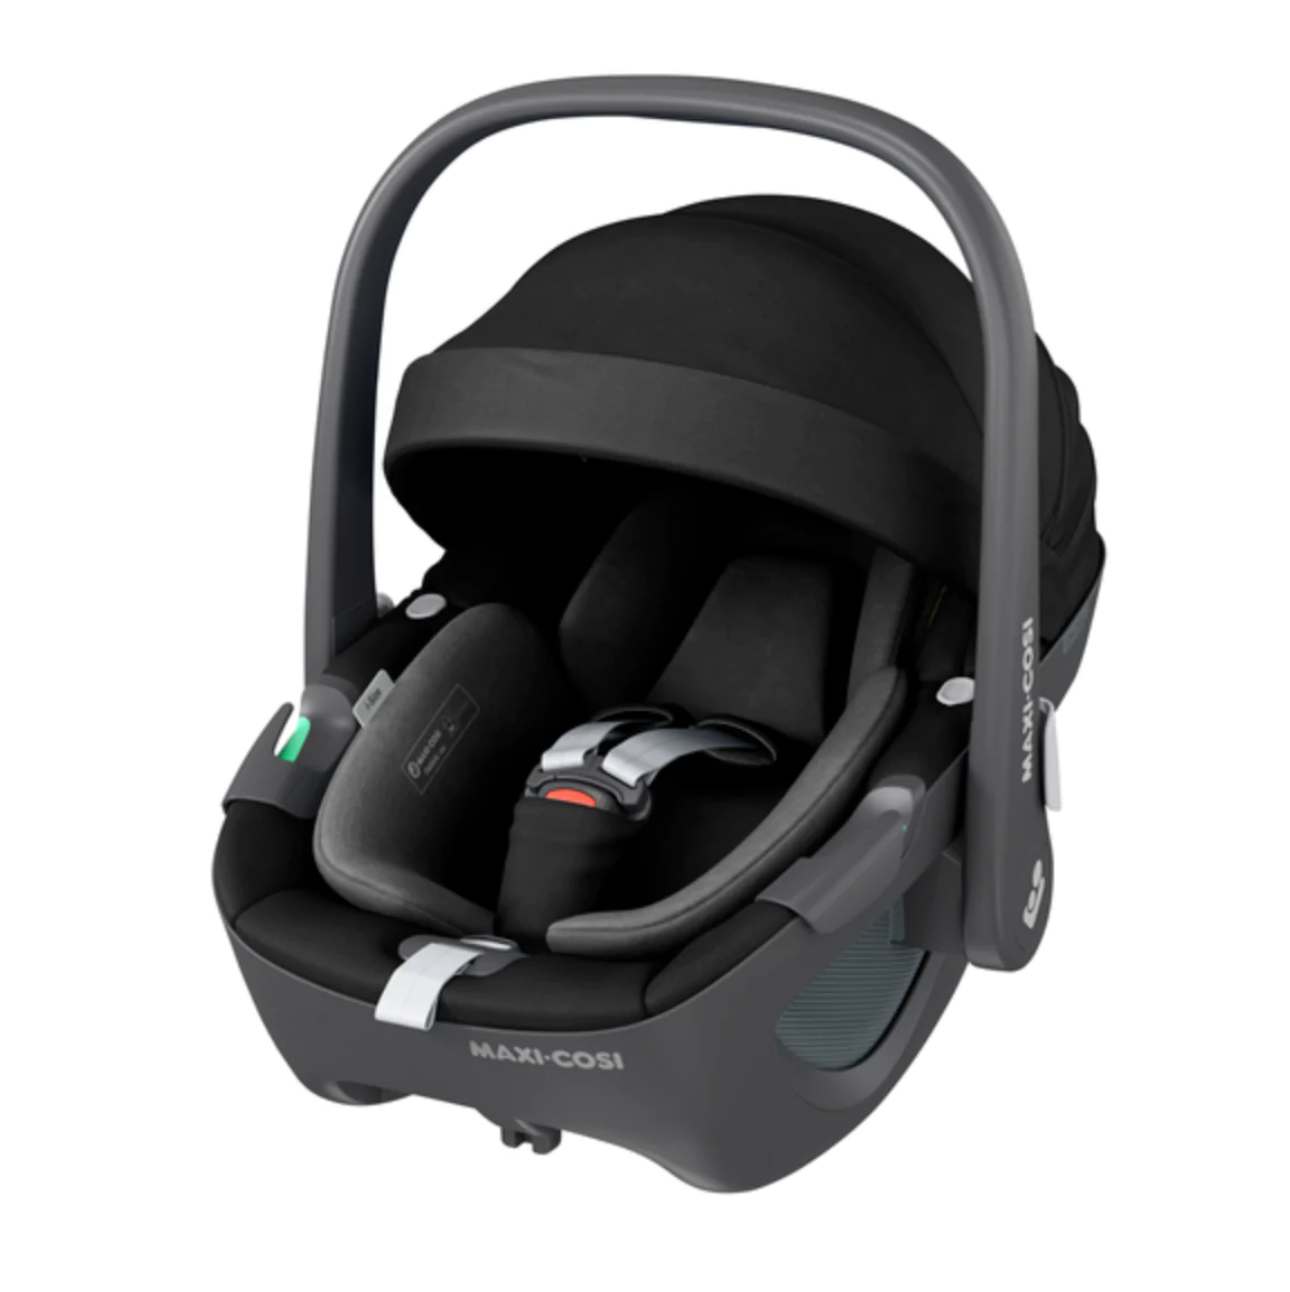 Egg2 Special Edition Luxury Bundle with Maxi-Cosi Pebble 360 Car Seat - Black Geo